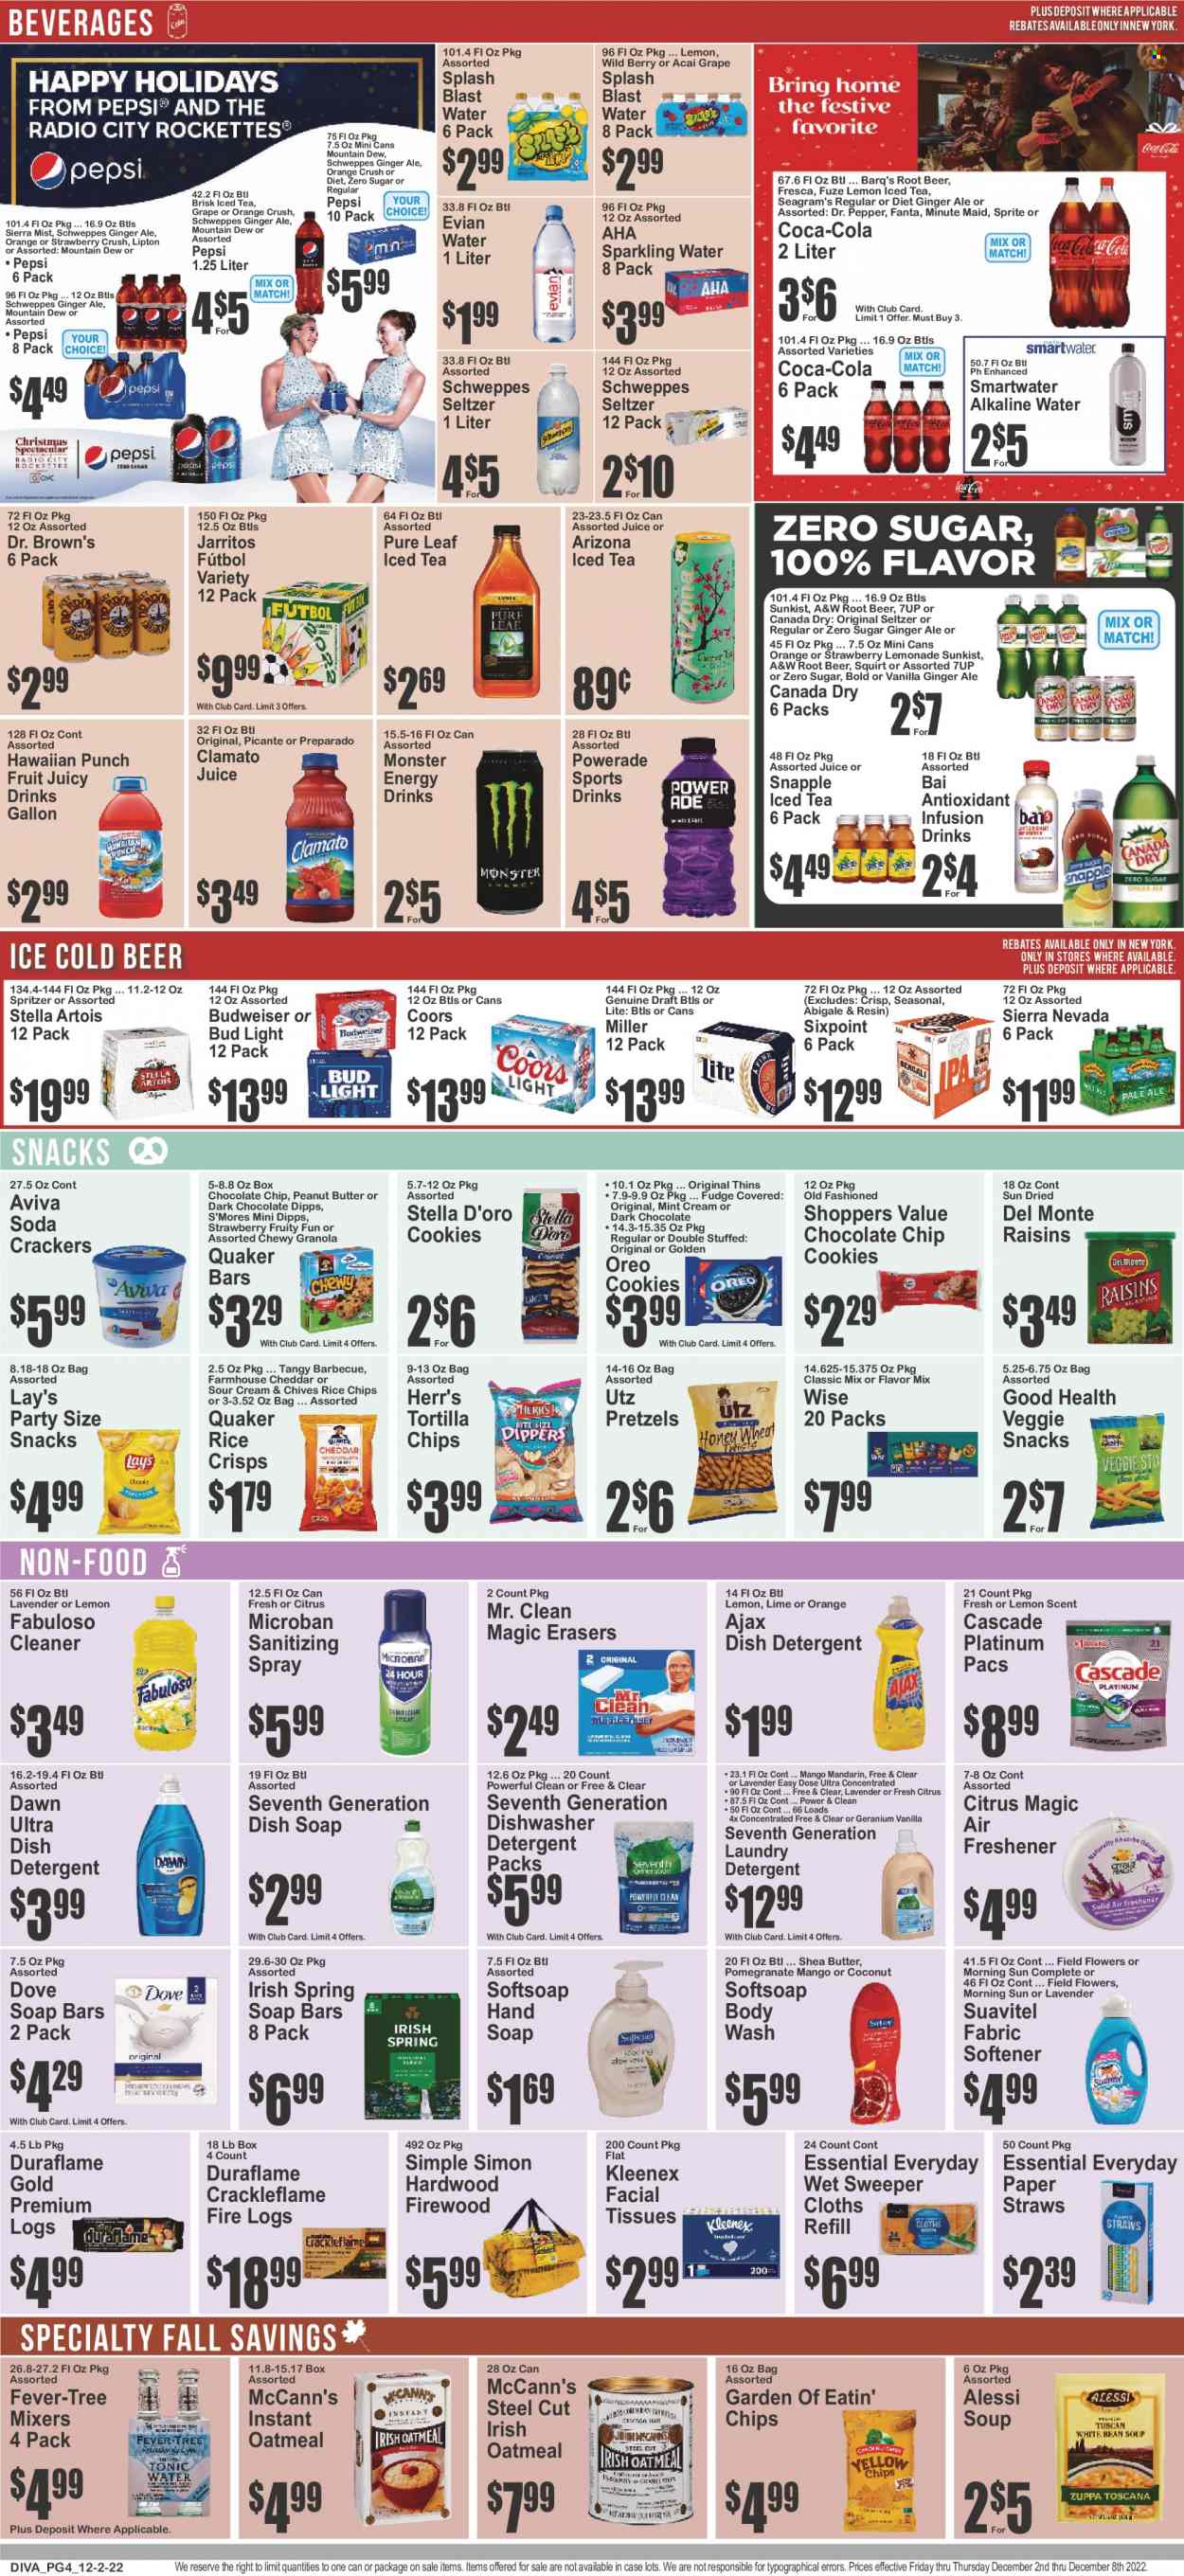 thumbnail - Key Food Flyer - 12/02/2022 - 12/08/2022 - Sales products - pretzels, chives, mandarines, oranges, soup, Quaker, cheese, Oreo, cookies, Dove, fudge, snack, crackers, tortilla chips, chips, Lay’s, Thins, rice crisps, oatmeal, Del Monte, granola, rice, peanut butter, raisins, dried fruit, Canada Dry, Coca-Cola, ginger ale, lemonade, Mountain Dew, Schweppes, Sprite, Powerade, Pepsi, juice, Fanta, energy drink, Monster, Lipton, ice tea, Dr. Pepper, Clamato, 7UP, Monster Energy, AriZona, Snapple, Dr. Brown's, A&W, Sierra Mist, Bai, fruit punch, seltzer water, soda, sparkling water, Smartwater, alkaline water, Evian, Pure Leaf, beer, Bud Light, Miller, Kleenex, tissues, detergent, cleaner, Ajax, Fabuloso, Cascade, fabric softener, laundry detergent, dishwasher cleaner, body wash, Softsoap, hand soap, soap, facial tissues, shea butter, straw, air freshener, Budweiser, Stella Artois, Coors, pomegranate. Page 5.